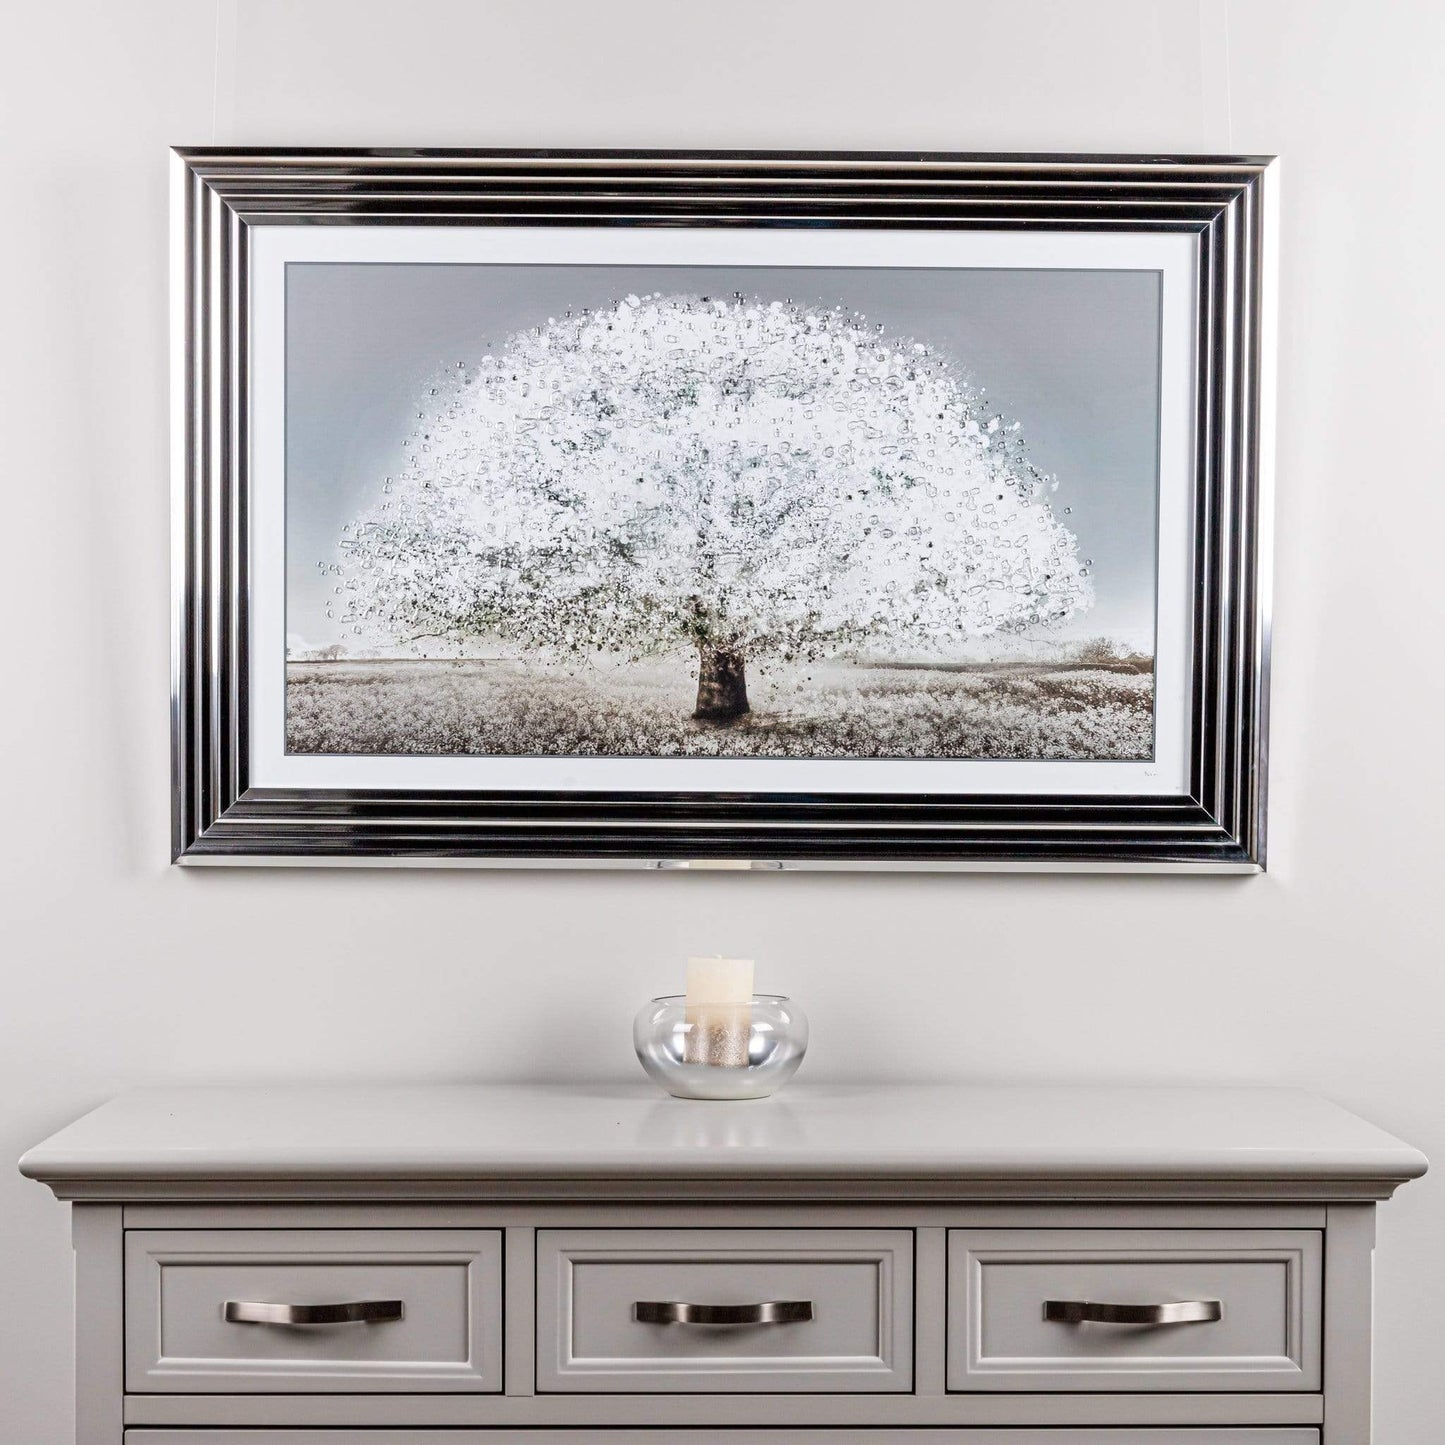 Pictures  -  Interiors Large White Blossom Tree Picture  -  50143978